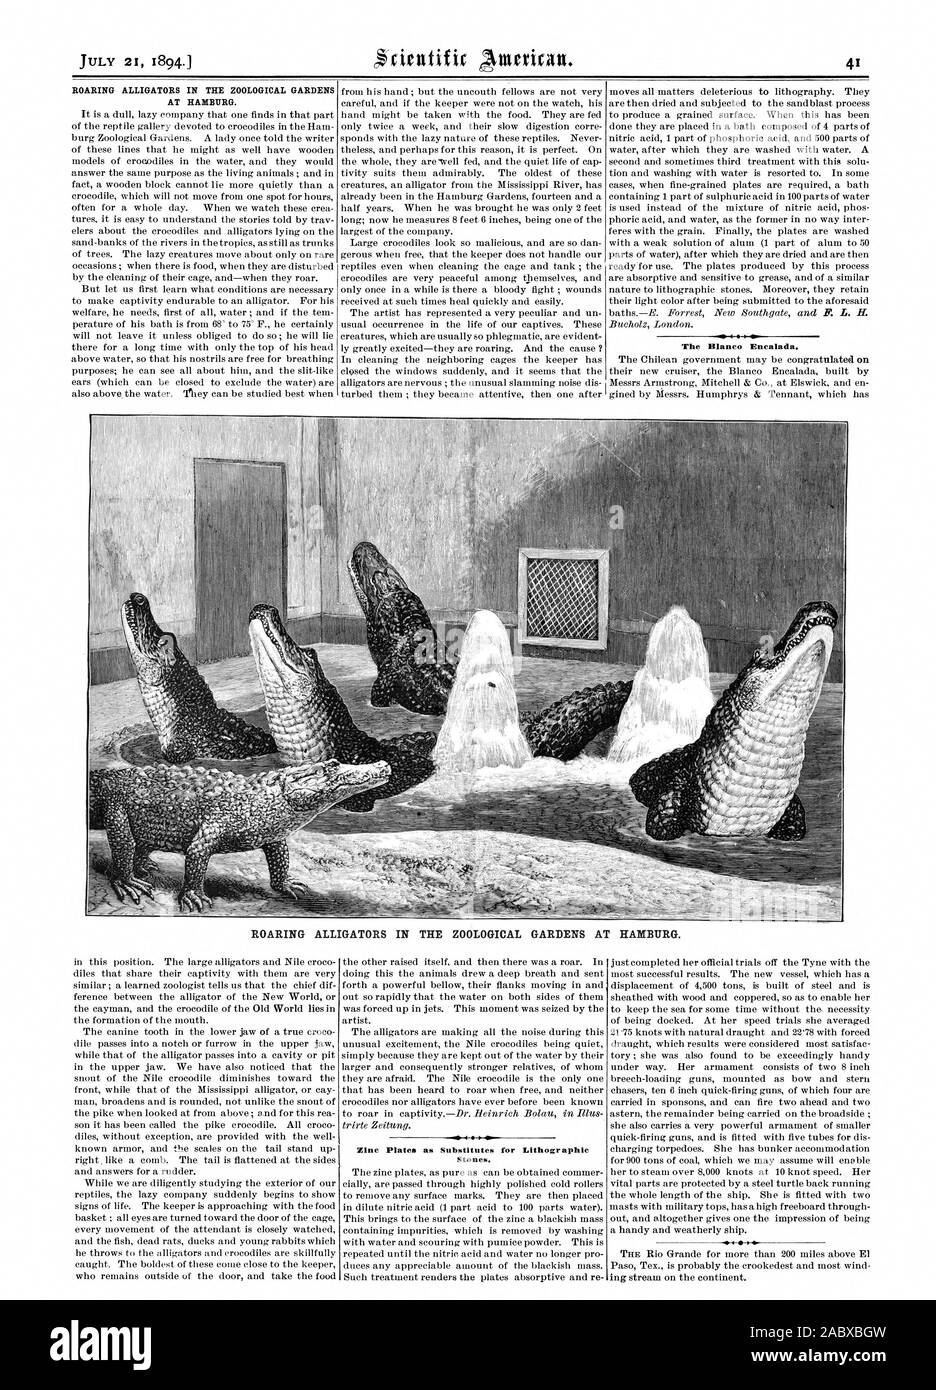 ROARING ALLIGATORS IN THE ZOOLOGICAL GARDENS AT HAMBURG. The Blanco Encalada. ROARING ALLIGATORS IN THE ZOOLOGICAL GARDENS AT HAMBURG. Zinc Plates as Substitutes for Lithographic Stones., scientific american, 1894-07-21 Stock Photo